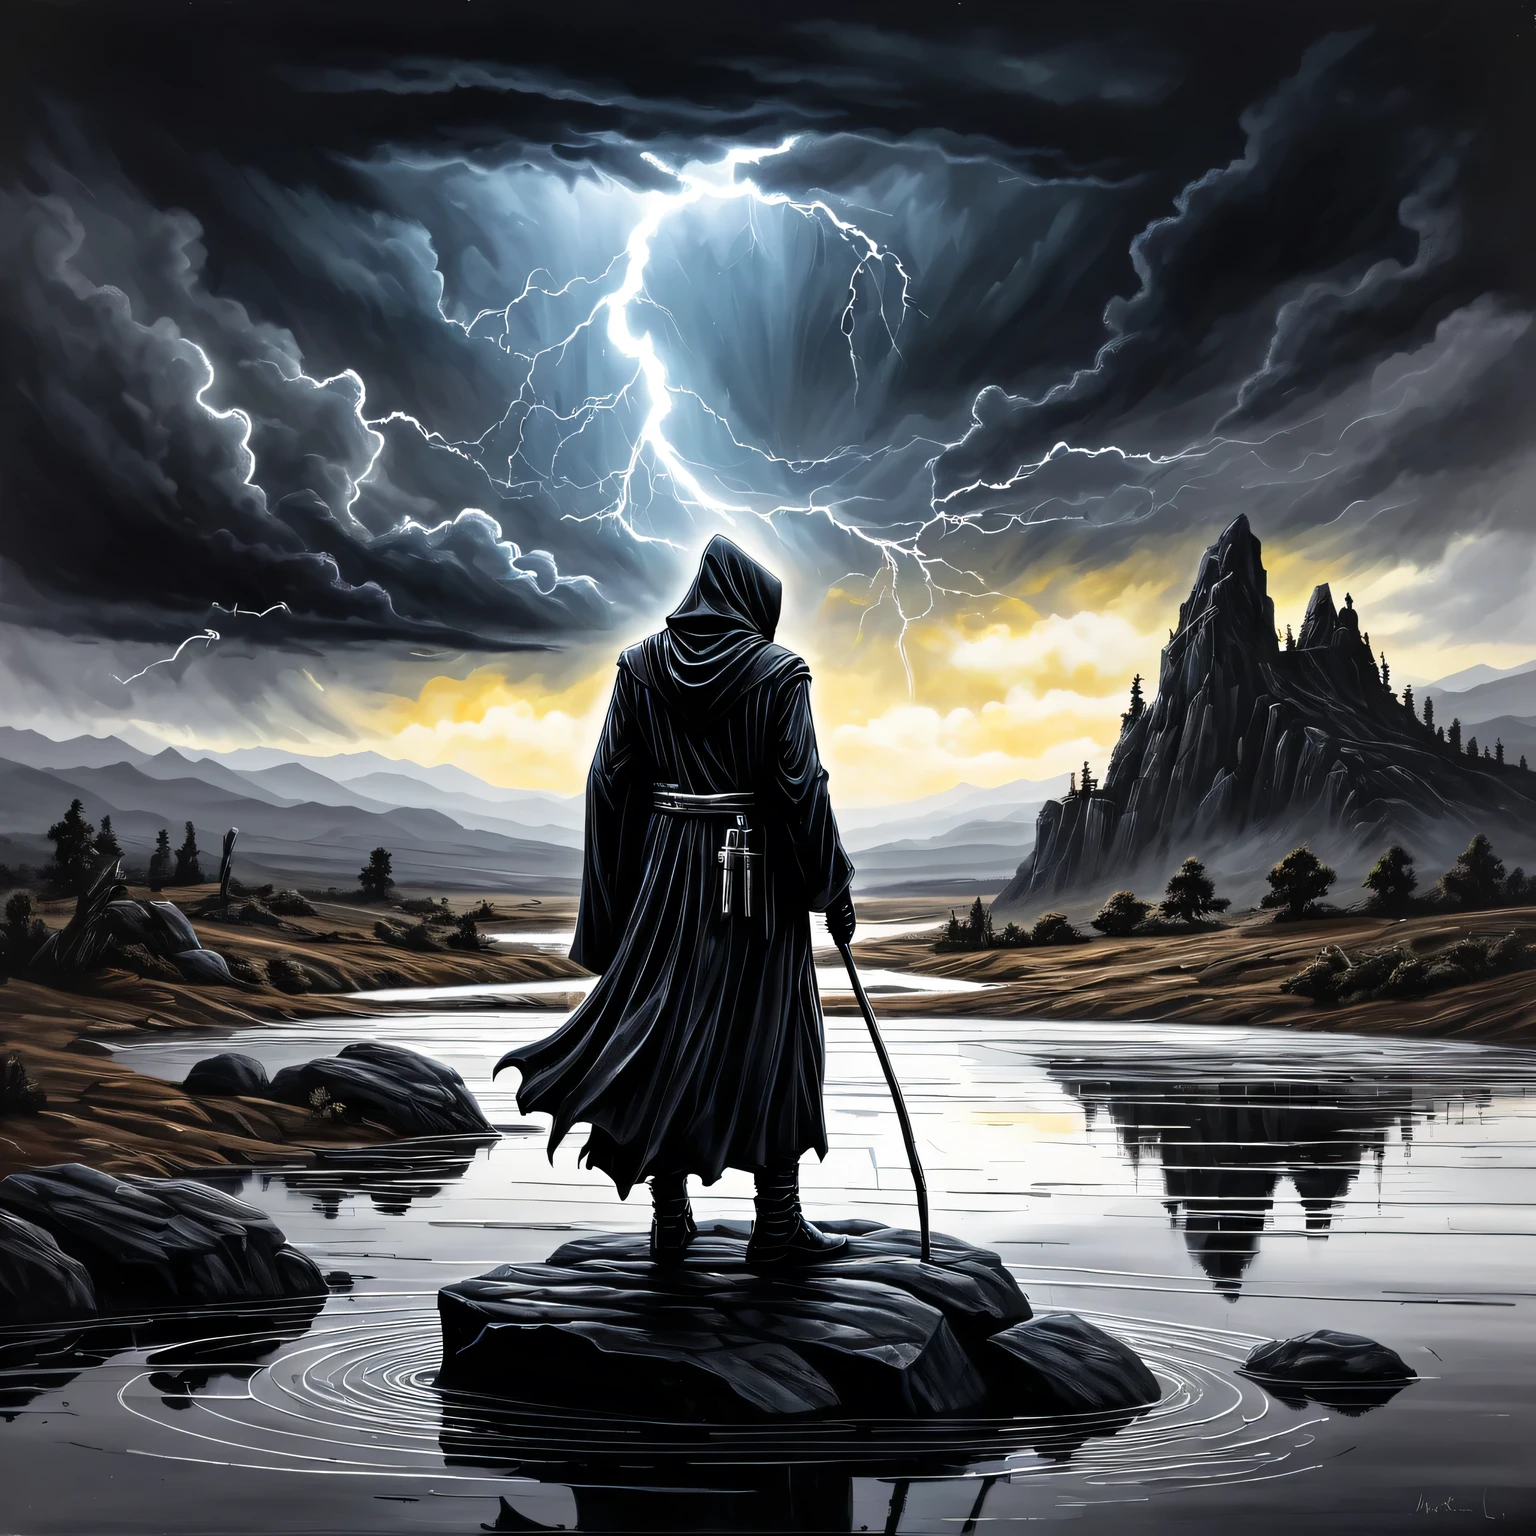 ((Liquid Metal Art)), the painting is painted with liquid metal on textured paper and depicts a beautiful minimalistic landscape with a Black Grim Reaper standing on a  rock, Liquid Metal Black Grim Reaper looks ominous and gloomy, in the background is a gloomy sky with clouds and lightning, the painting is made of liquid metal. Metal, masterwork, clear contours, 32 carats